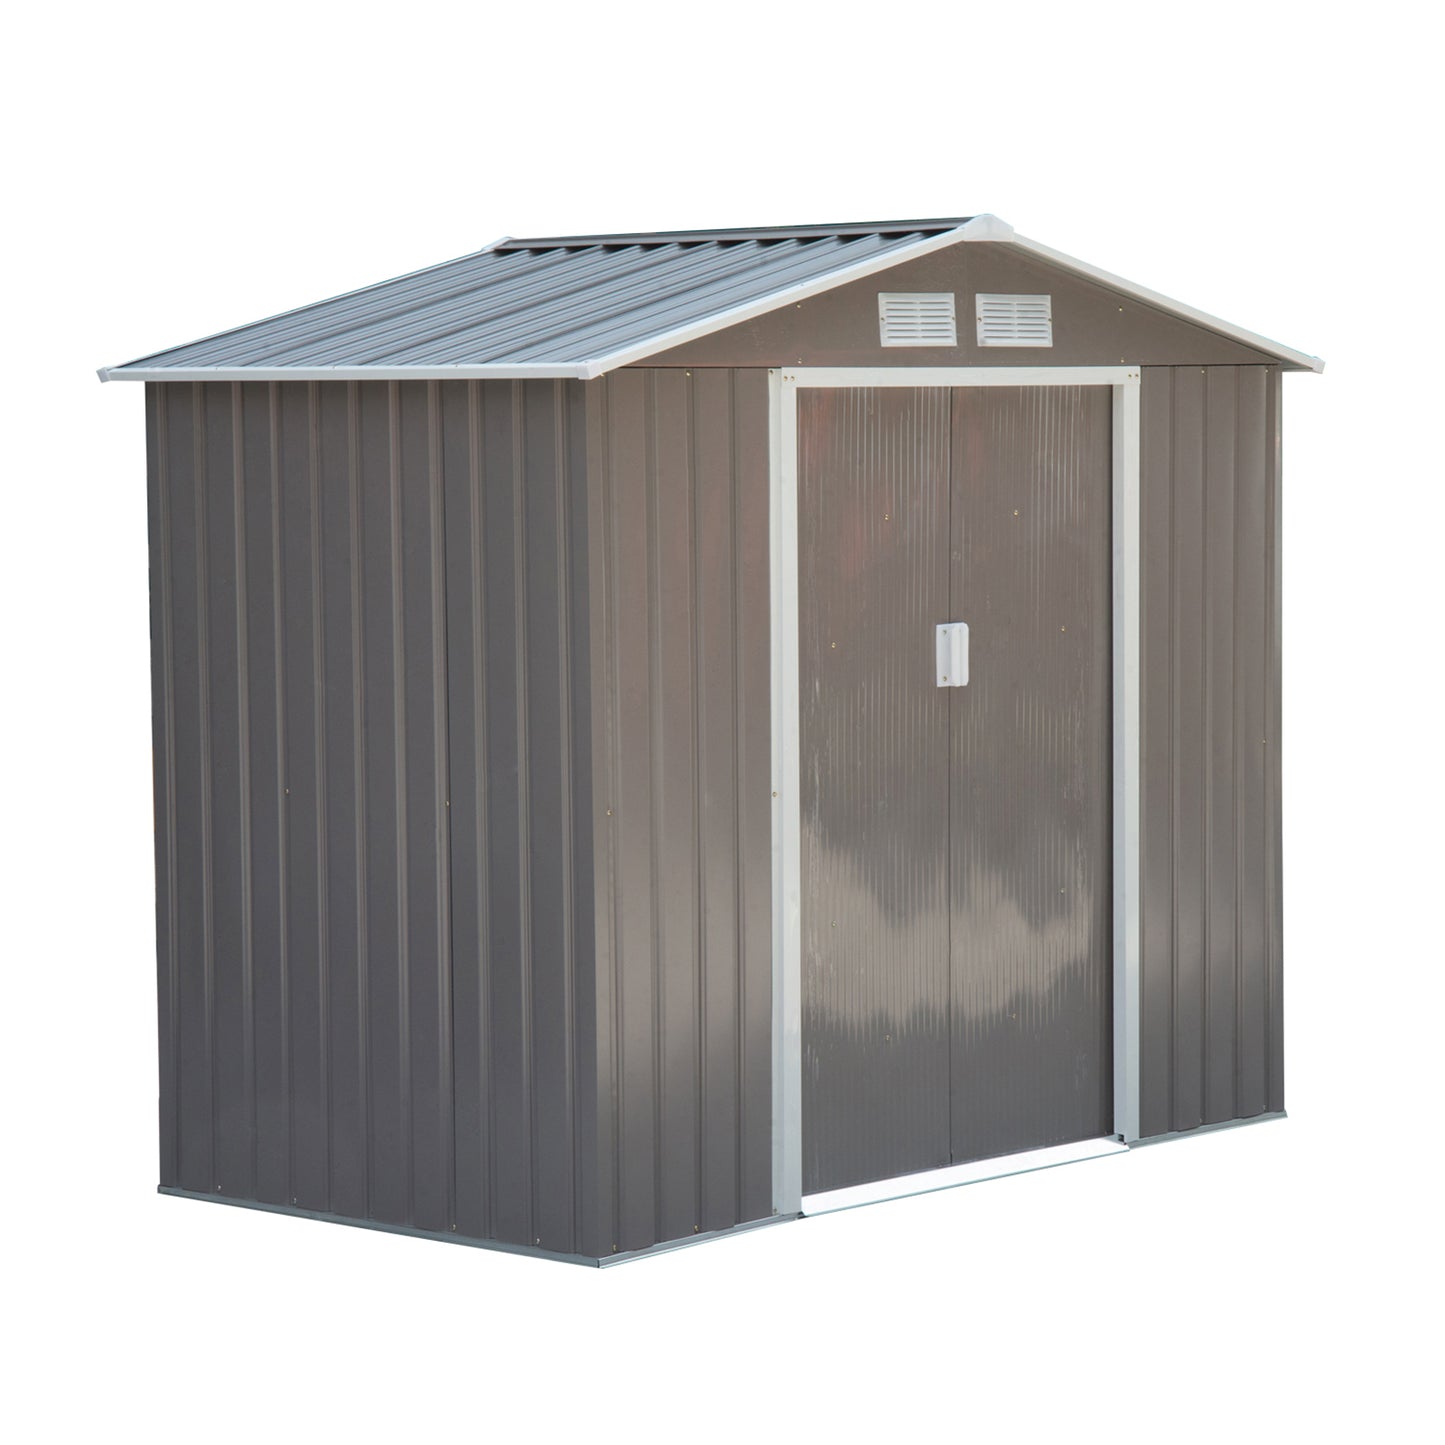 Outsunny 7ft x 4ft Lockable Metal Garden Storage Shed Storage w/ Air Vents Grey